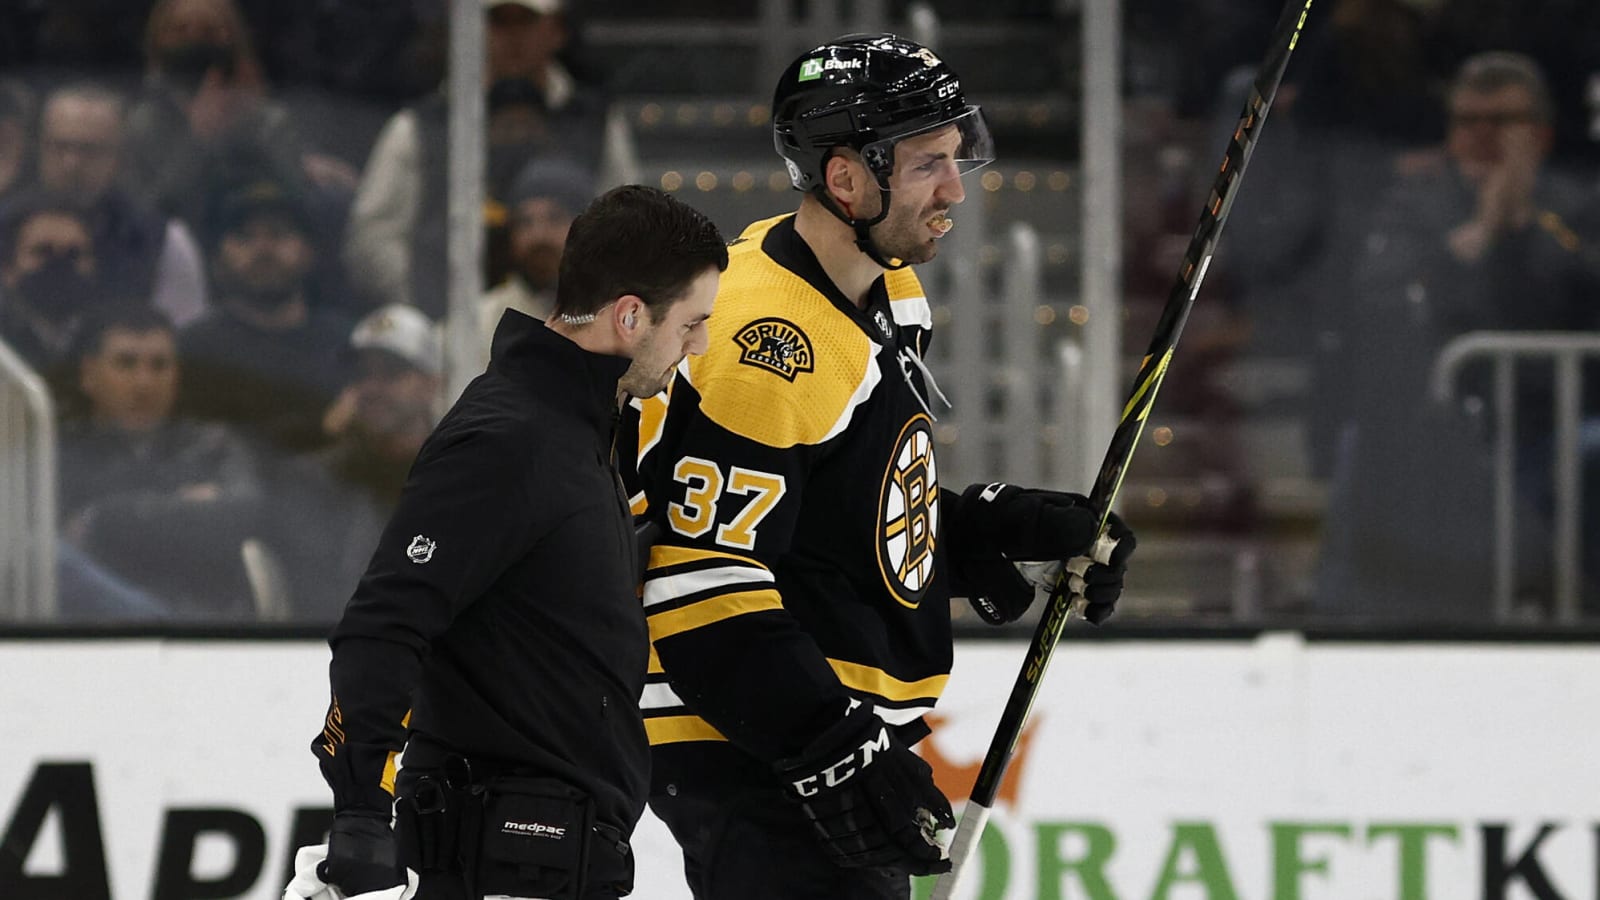 Patrice Bergeron to miss next game with upper-body injury